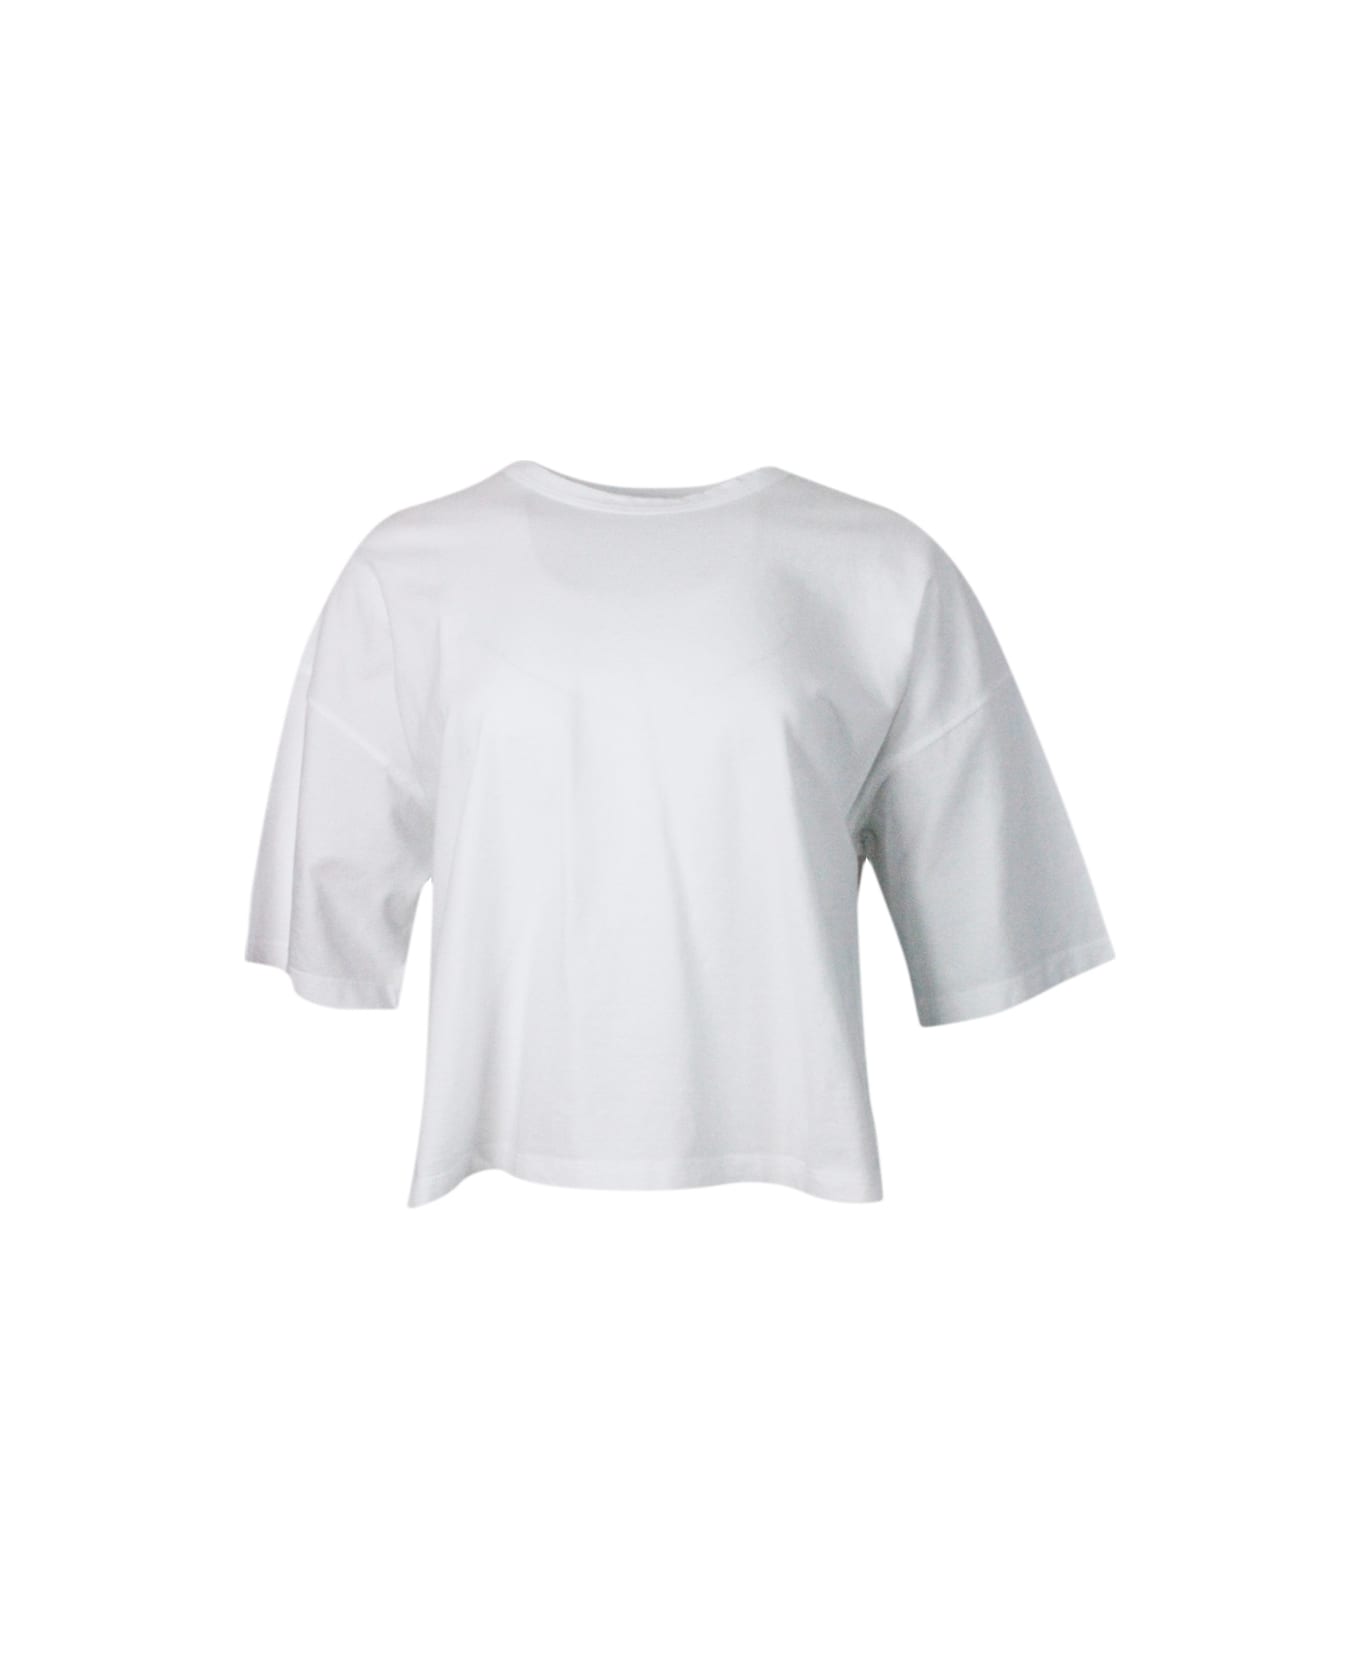 Malo Crew-neck, Short-sleeved T-shirt In 100% Soft Cotton, With An Oversized Fit And Vents On The Sides - White